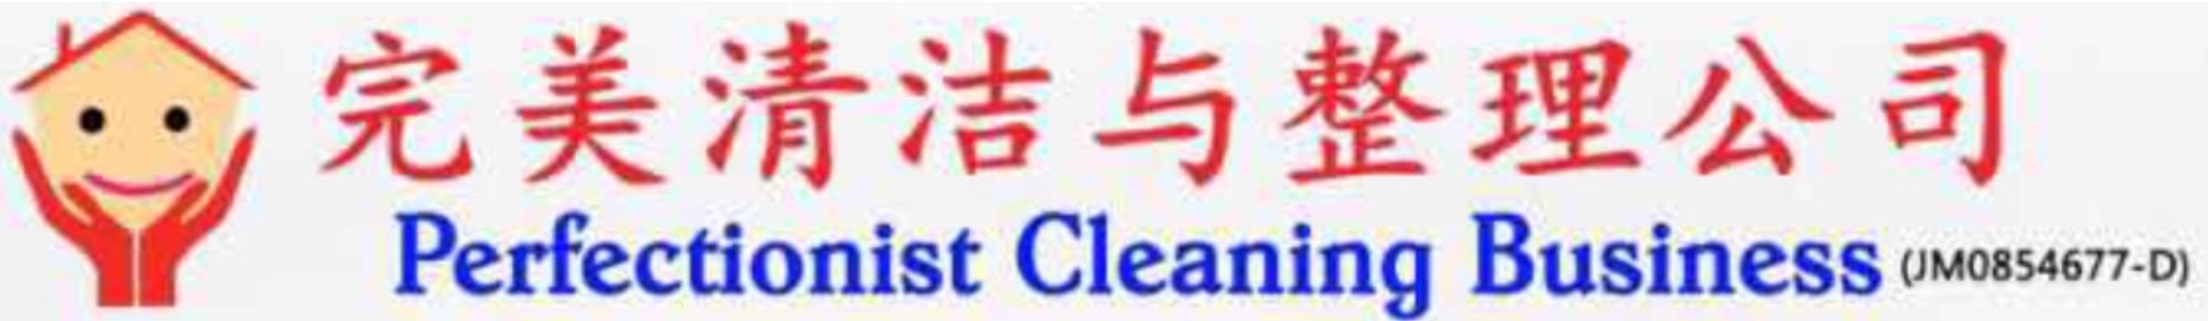 Commercial cleaning service in Johor Bahru